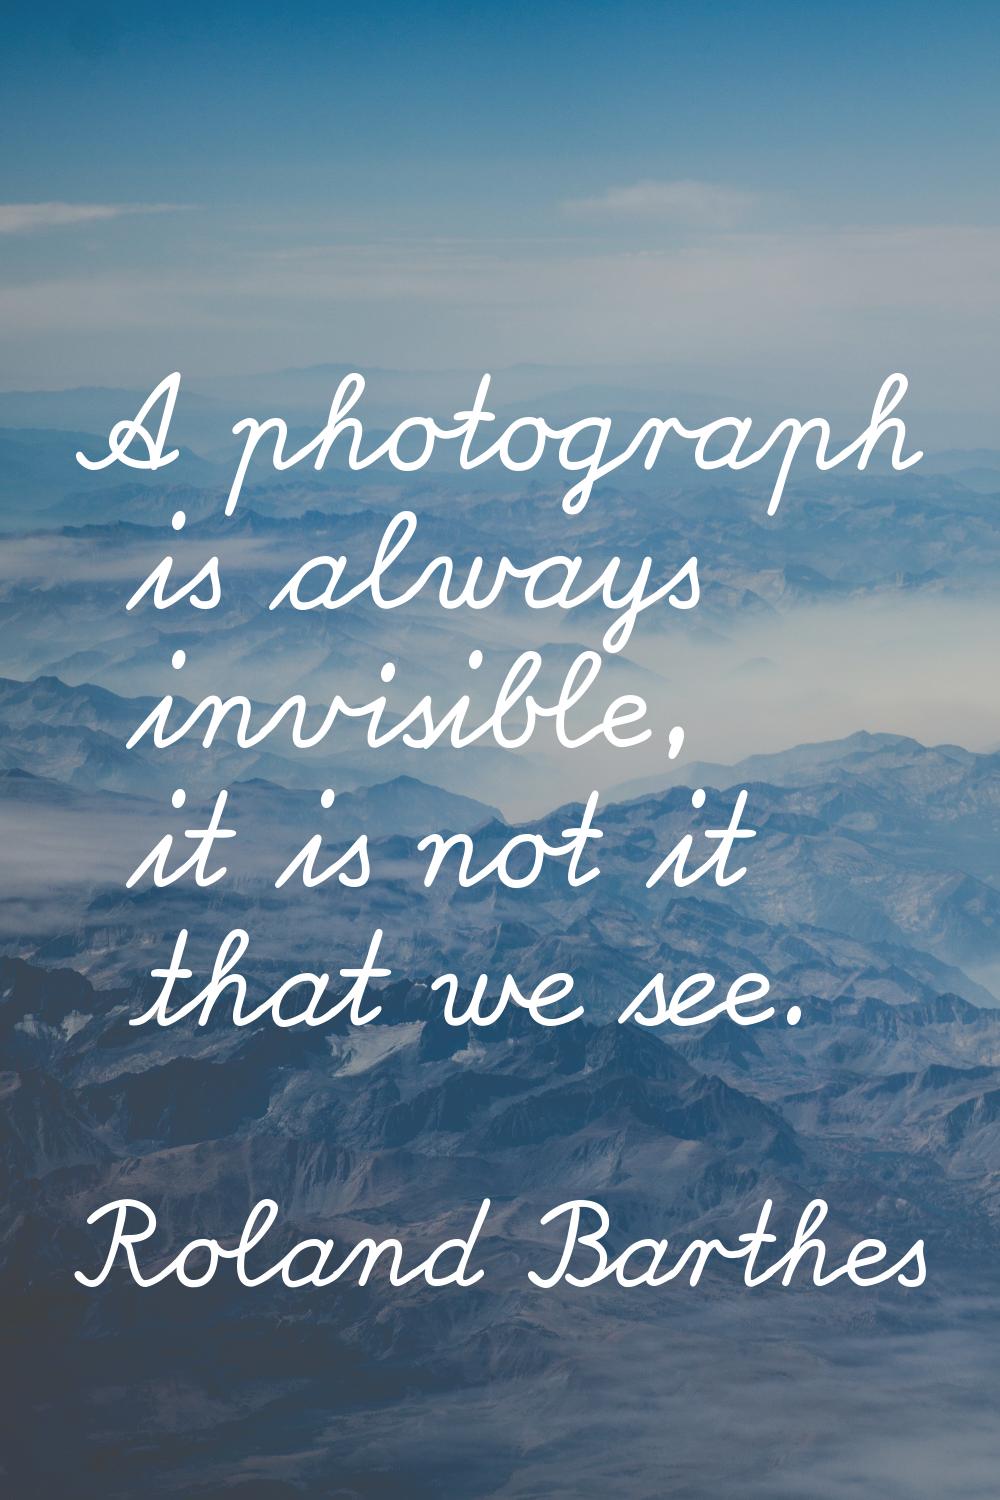 A photograph is always invisible, it is not it that we see.